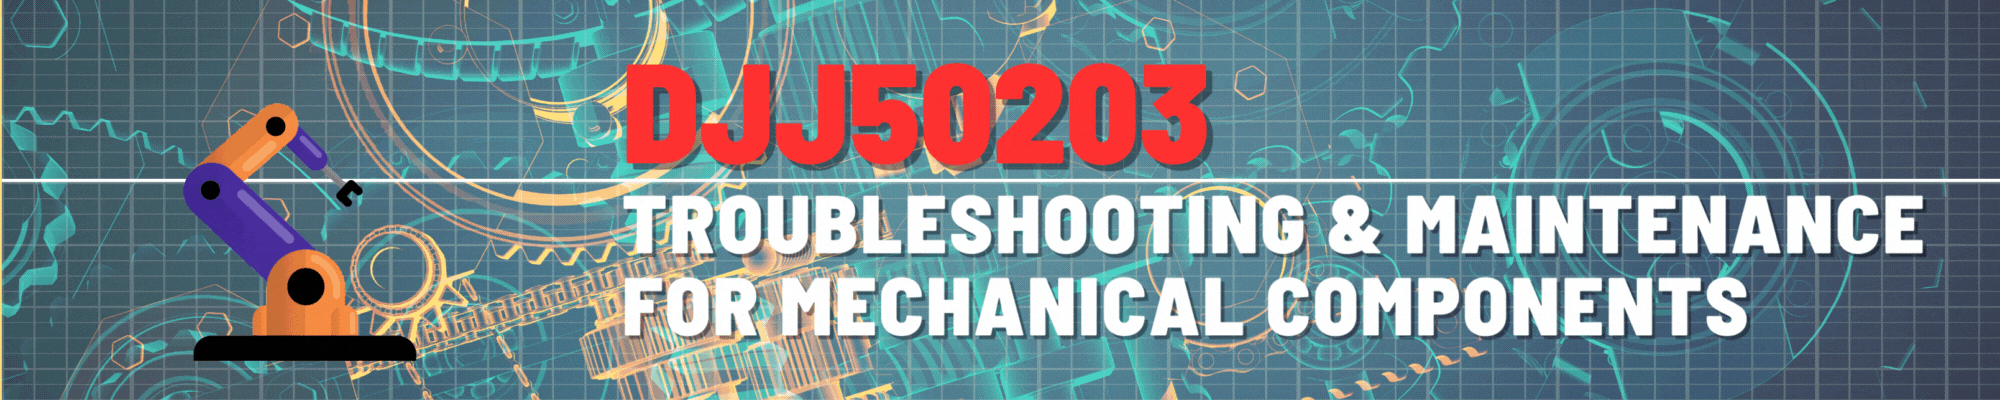 DJJ50203 TROUBLESHOOTING &amp; MAINTENANCE FOR MECHANICAL COMPONENTS